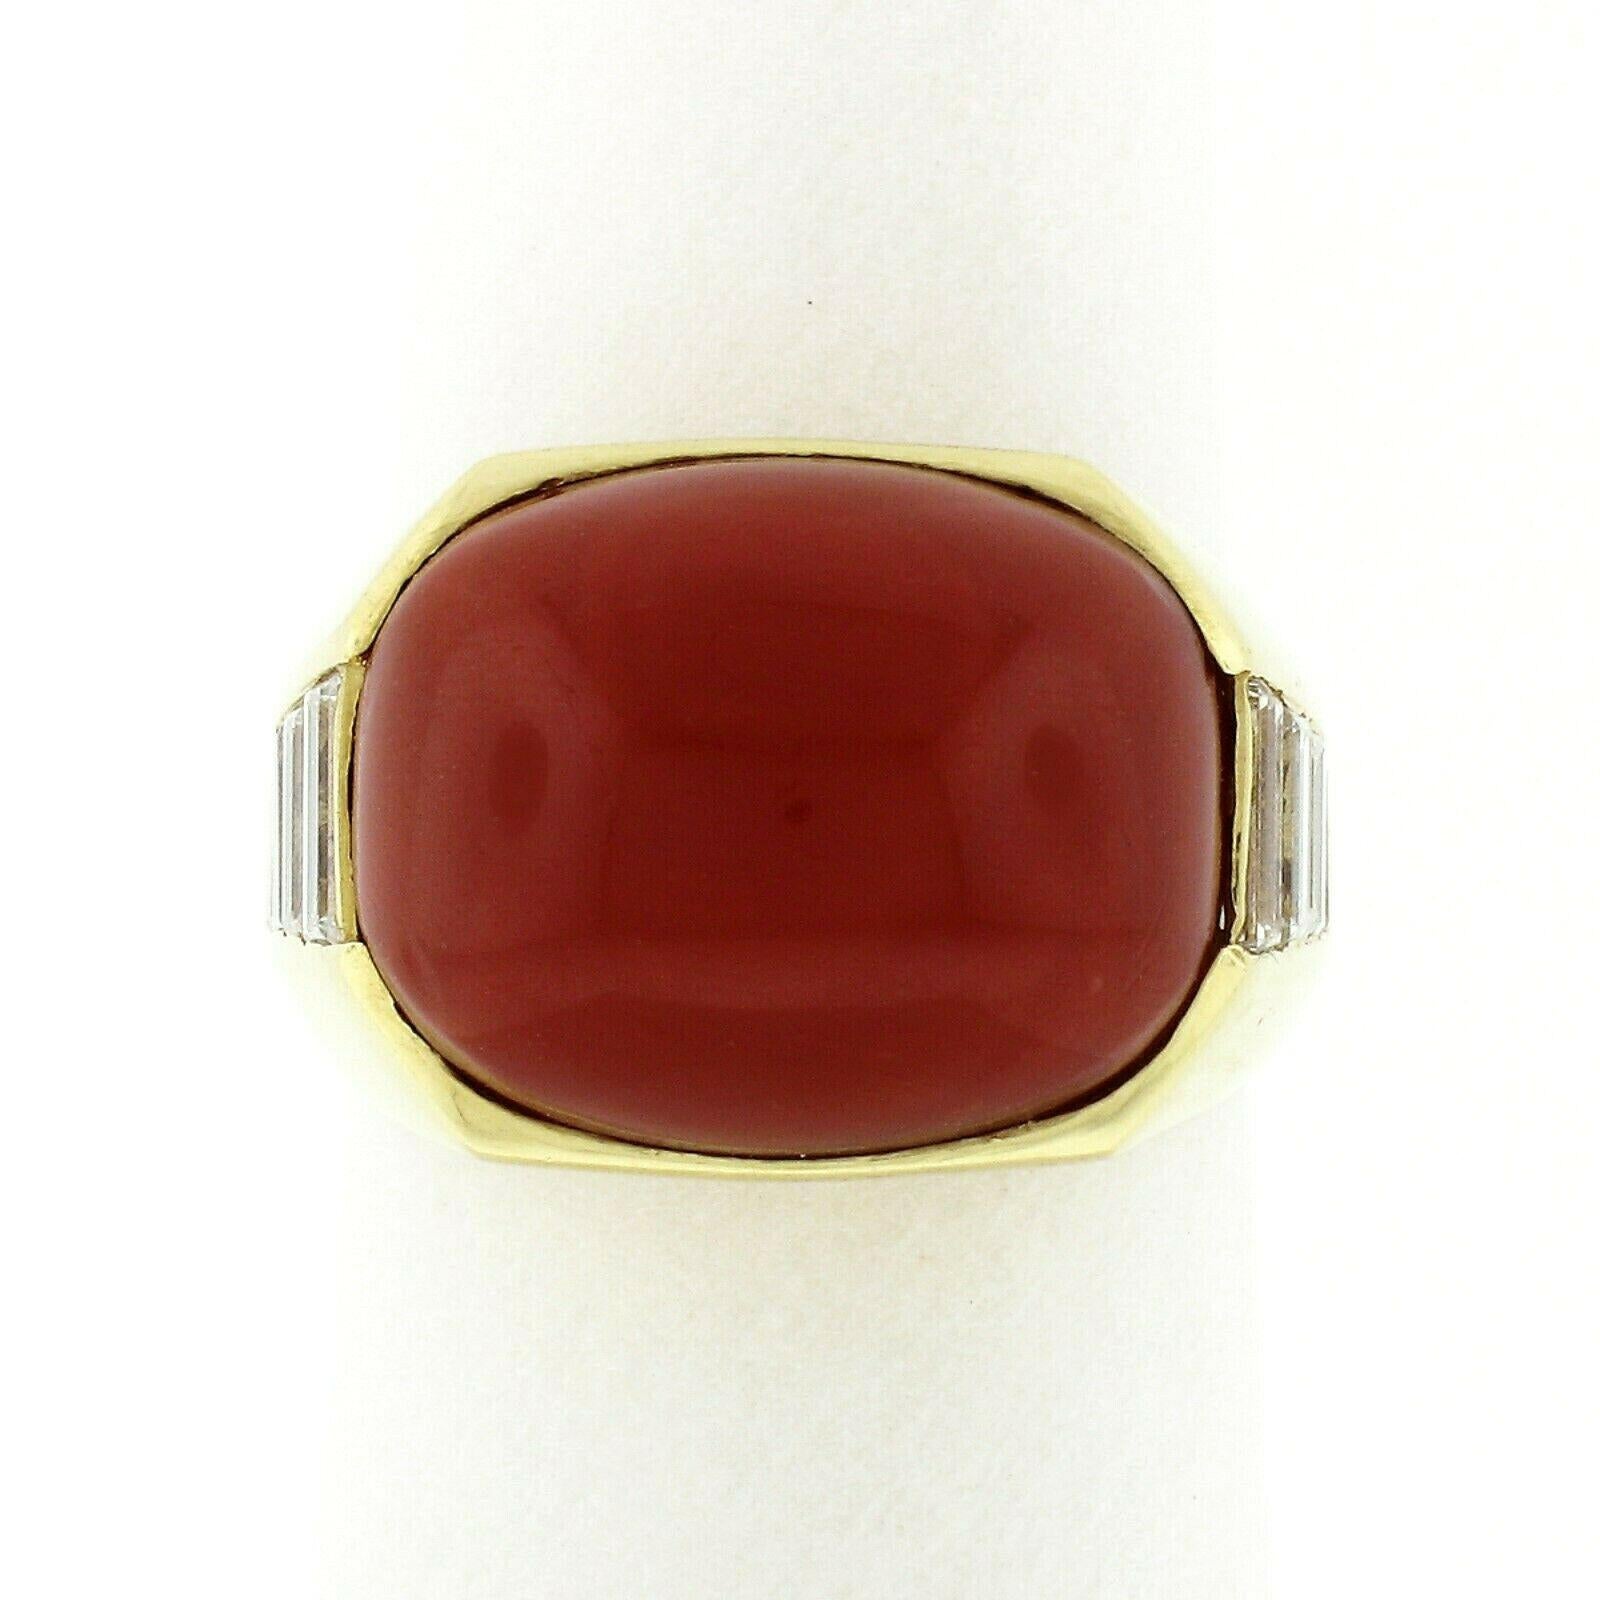 This truly breathtaking statement vintage ring was very well and solidly crafted in Italy from 18k yellow gold. The ring is set at its center with a gorgeous, natural coral stone that's certified by GIA. The coral has a truly desirable and rich